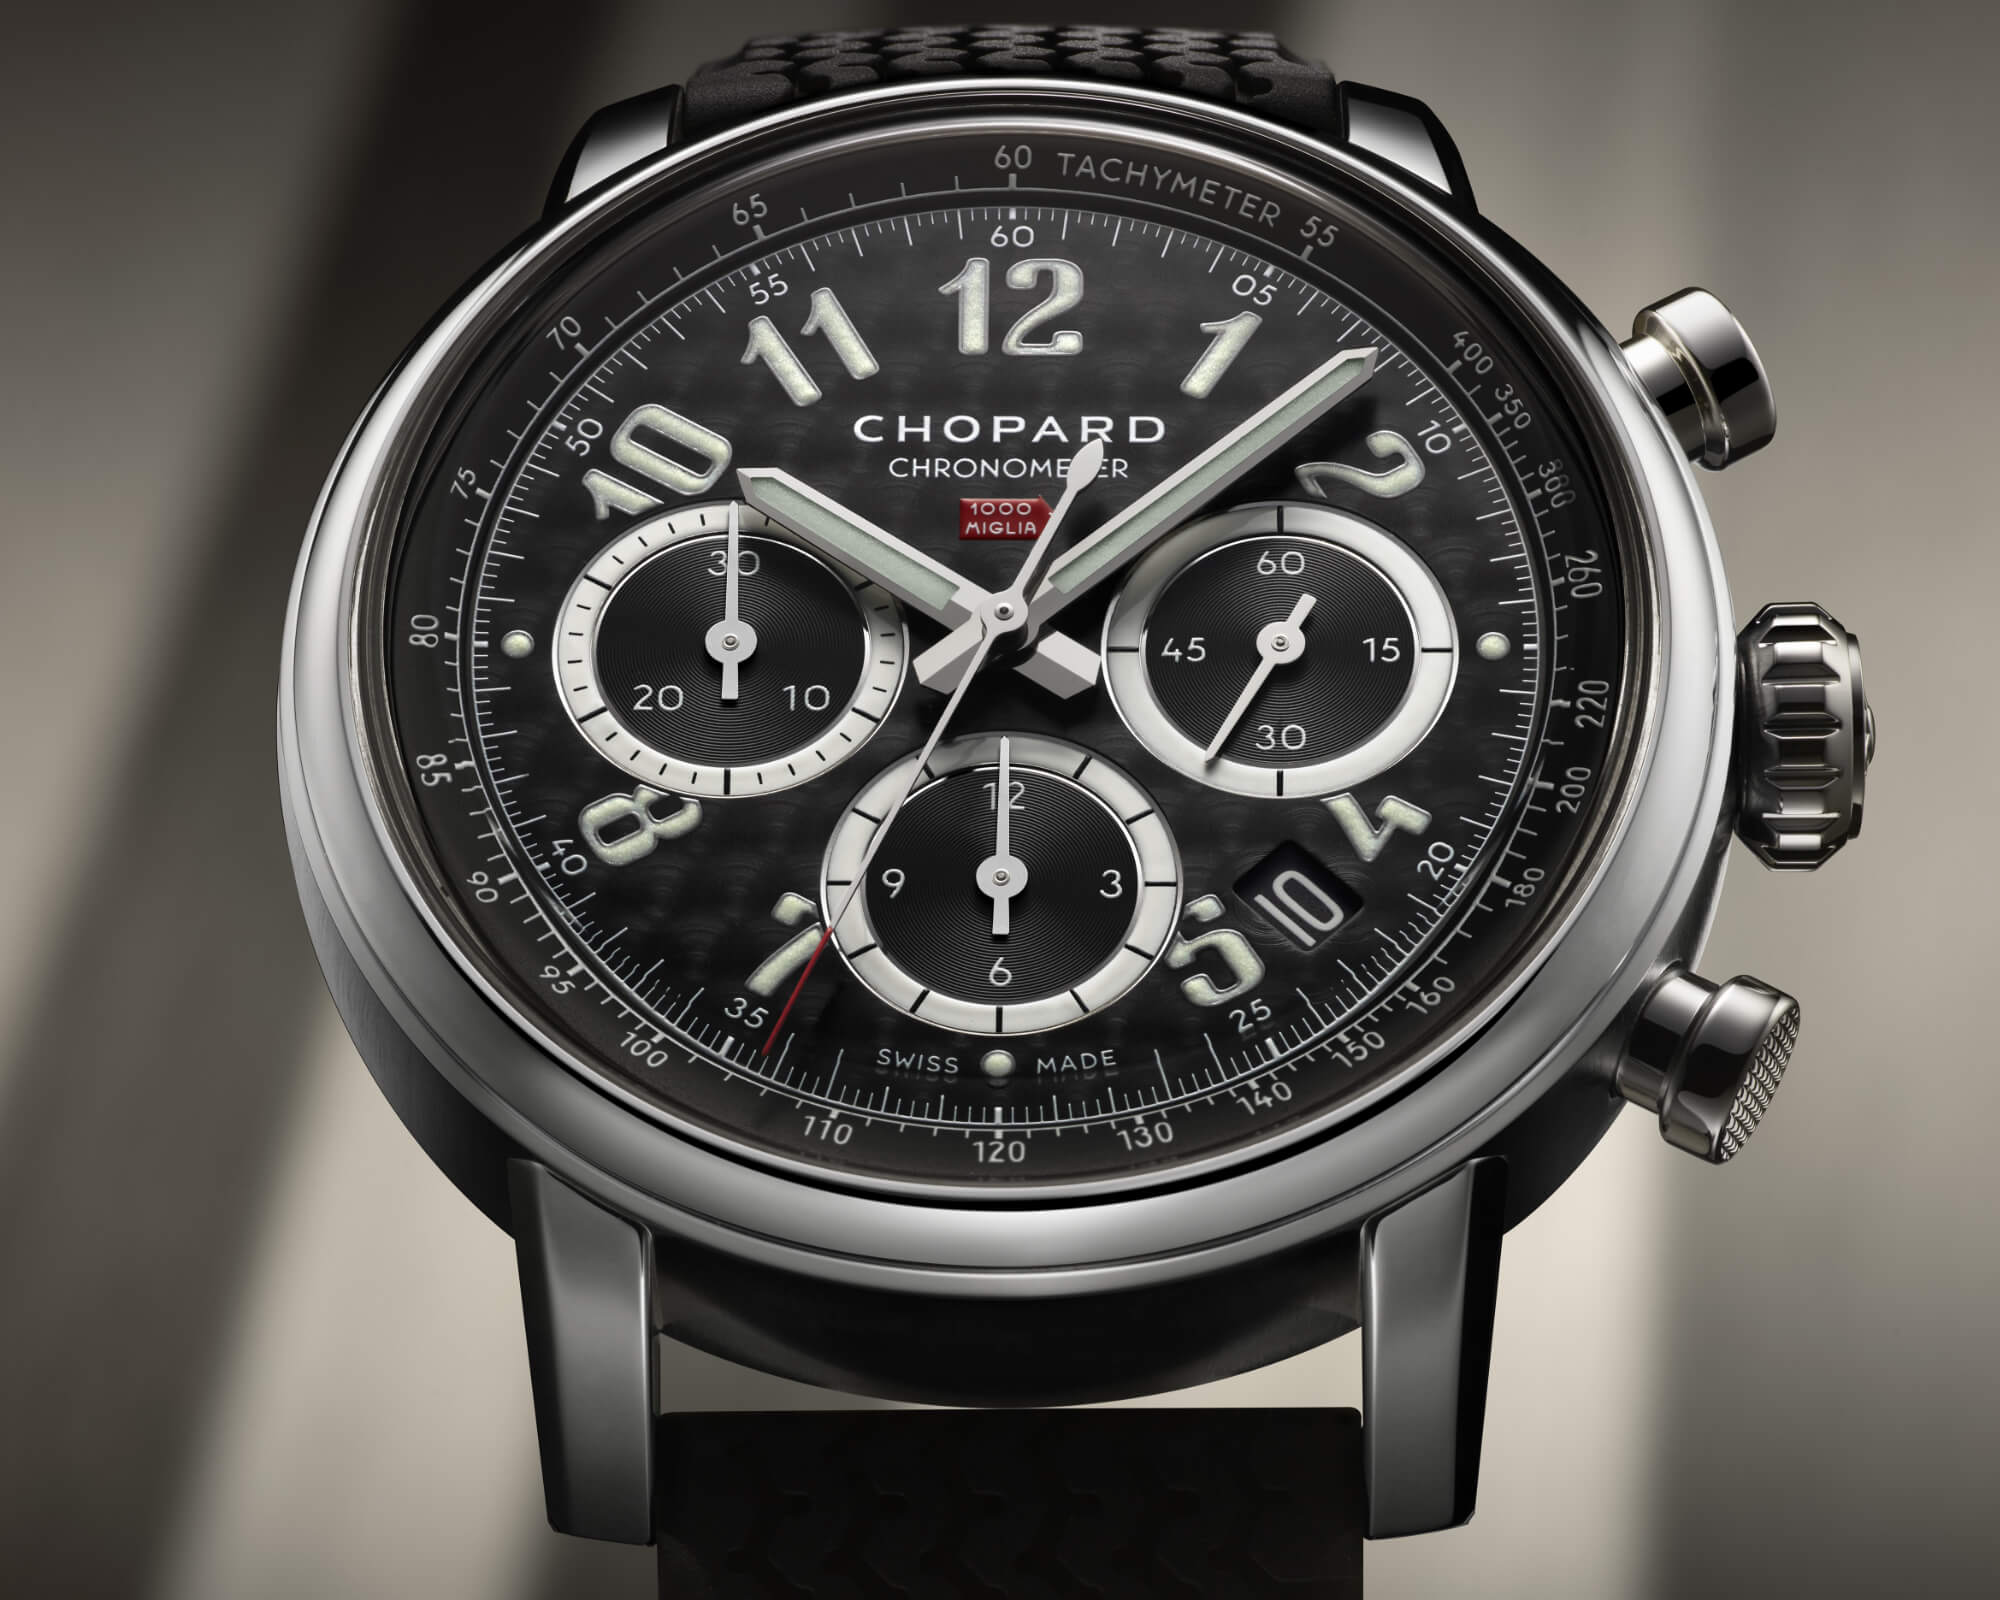 Hands-On: Chopard's New Mille Miglia Chronograph Bridges Old And